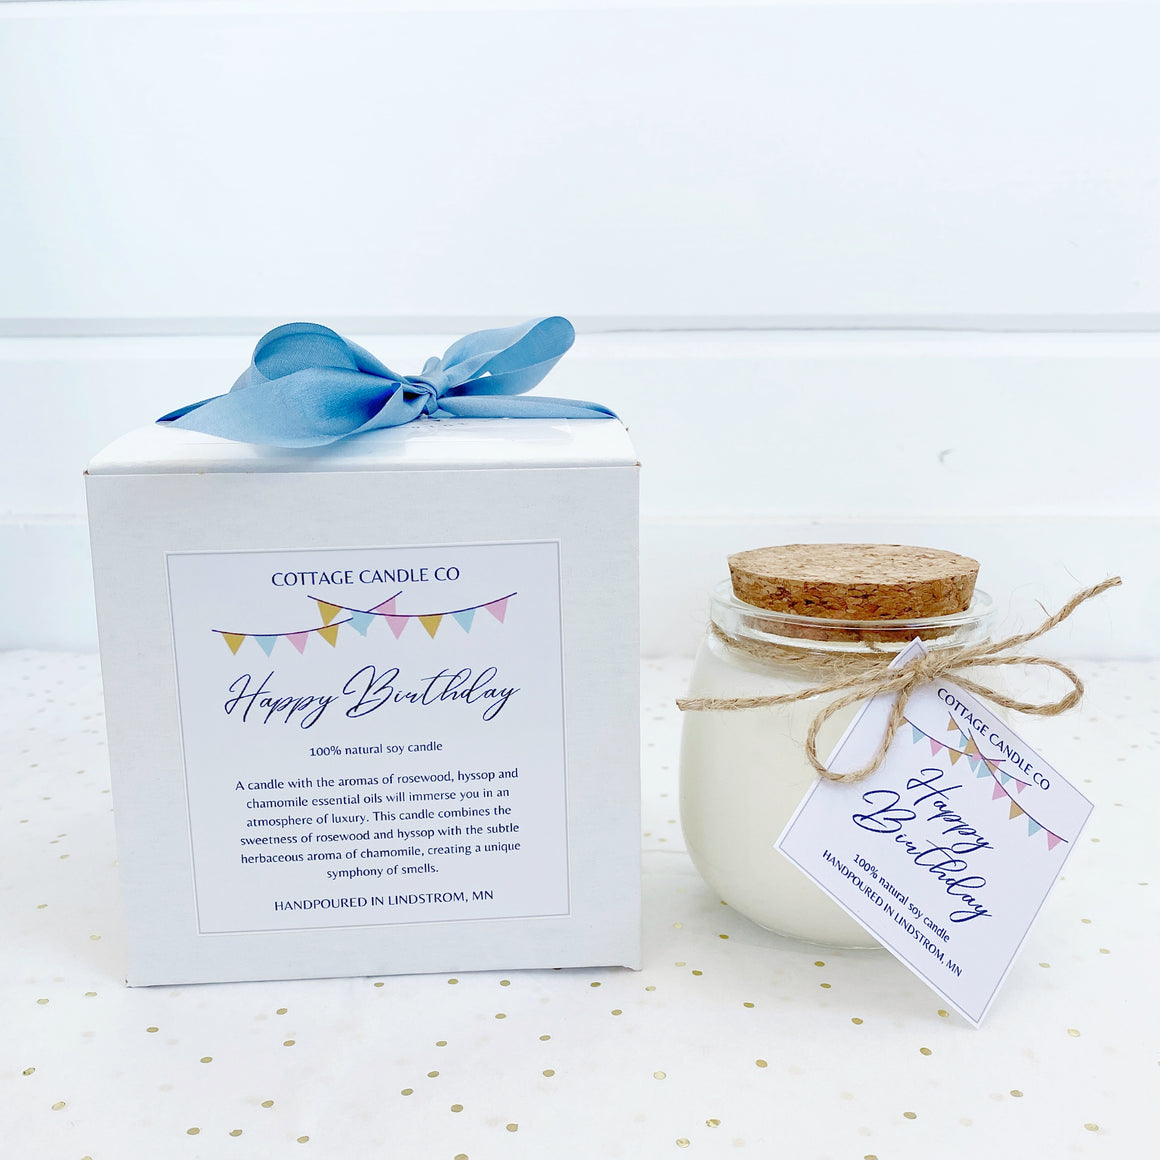 HAPPY BIRTHDAY CANDLE - THE PERFECT GIFT!